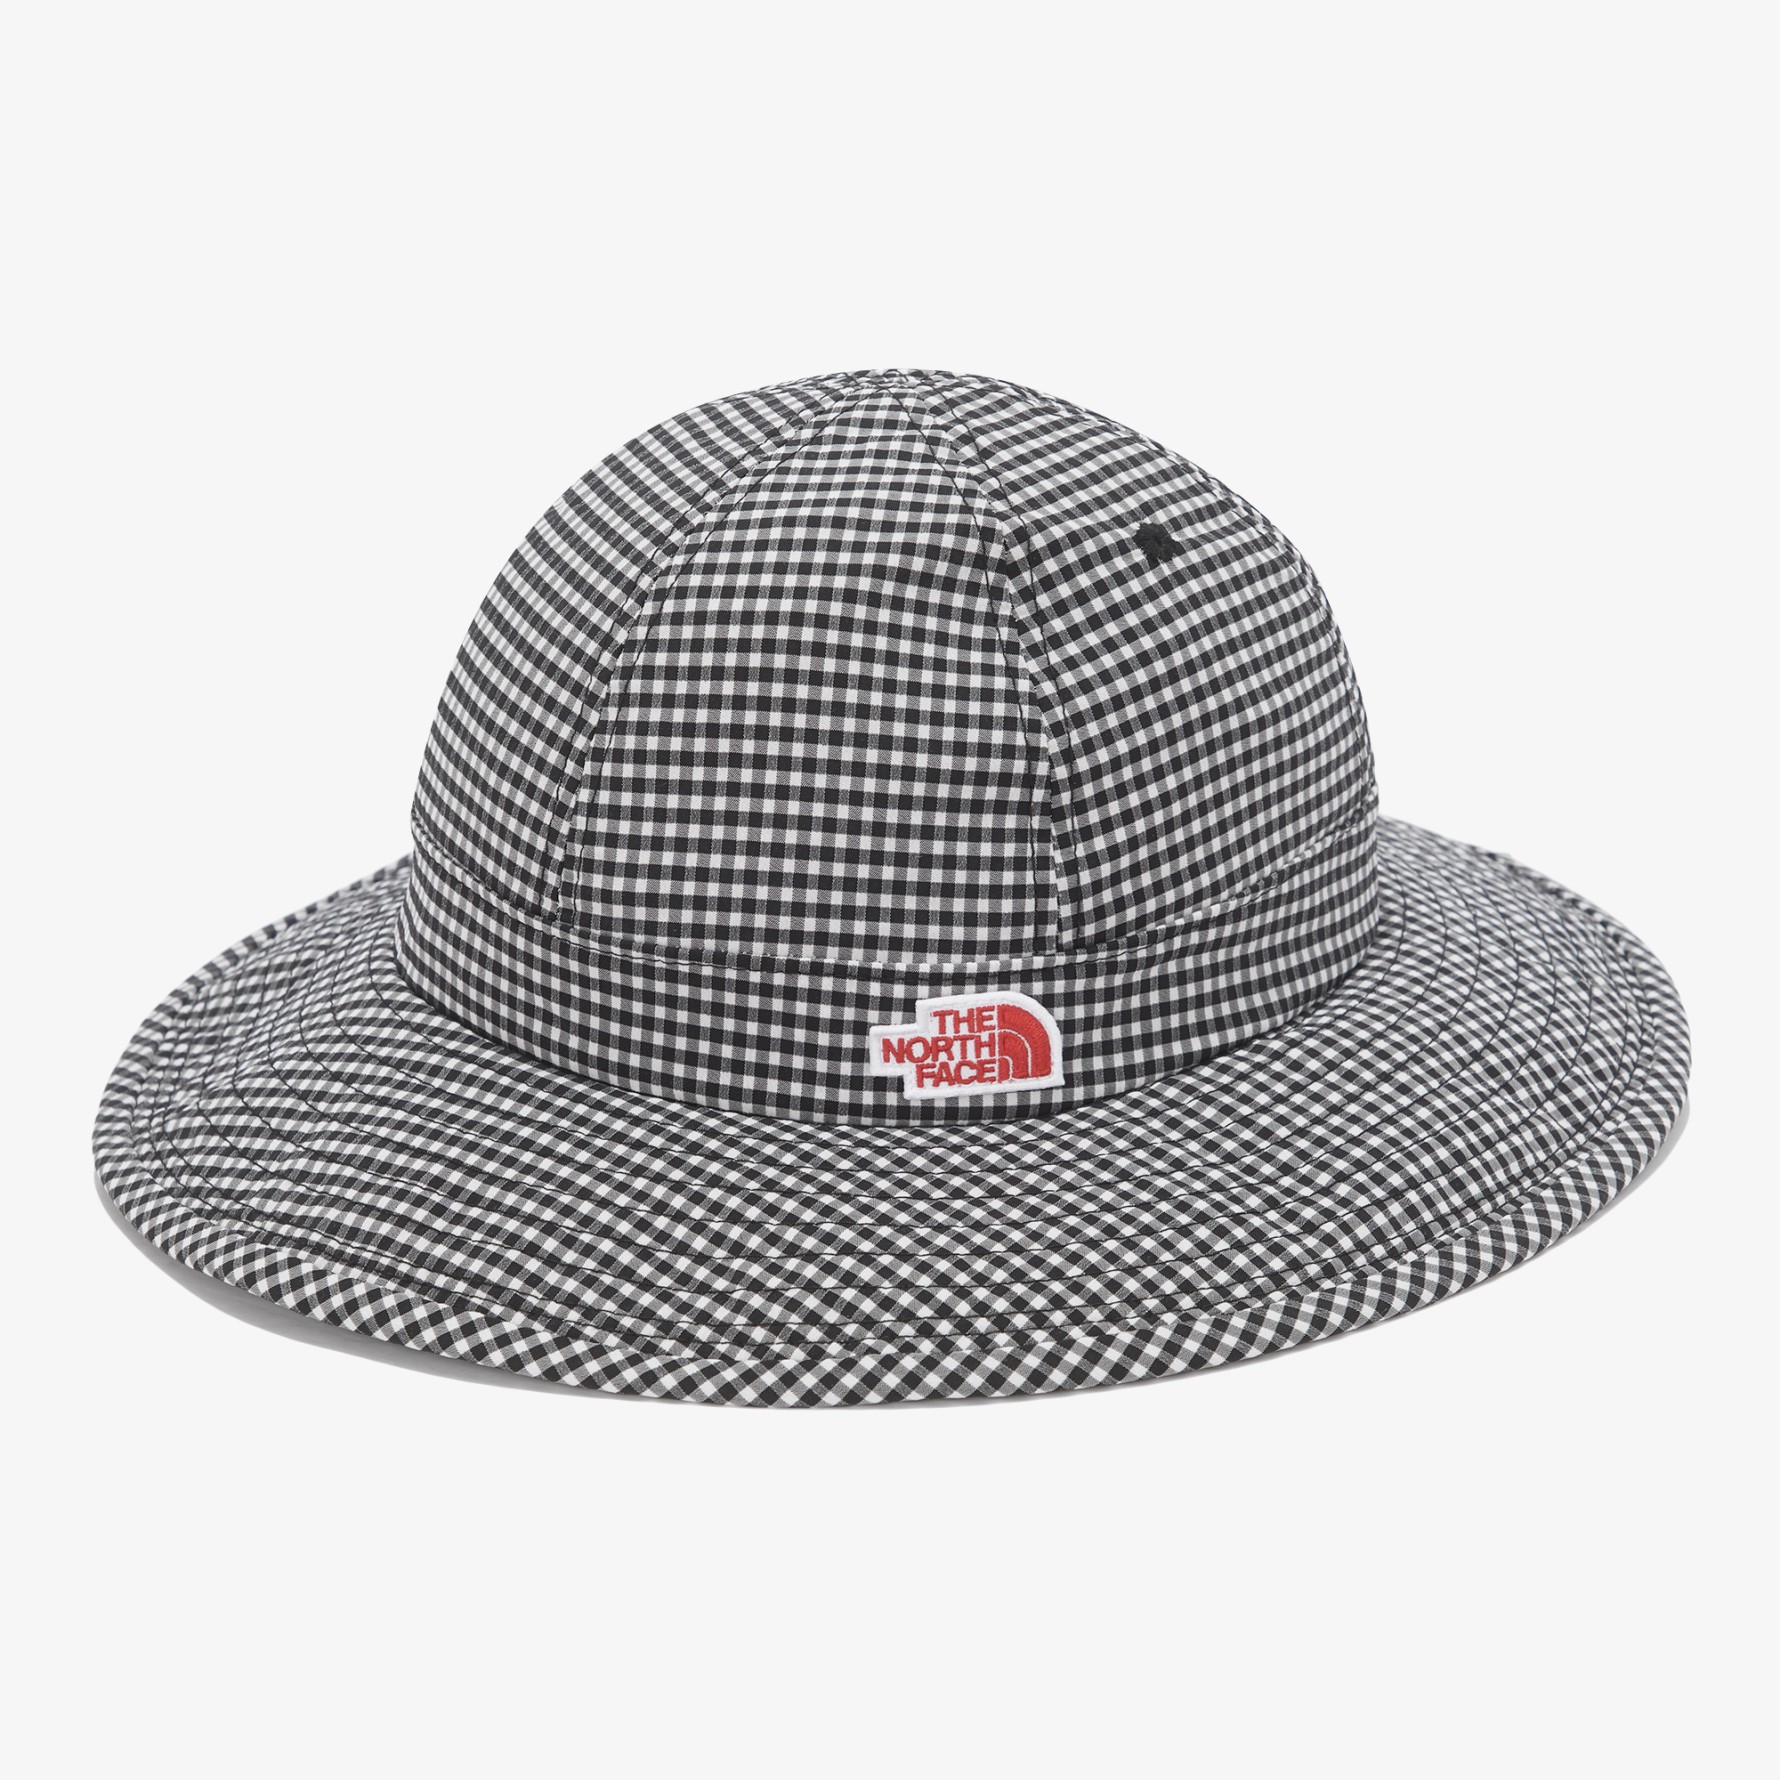 THE NORTH FACE-KIDS DOME HAT